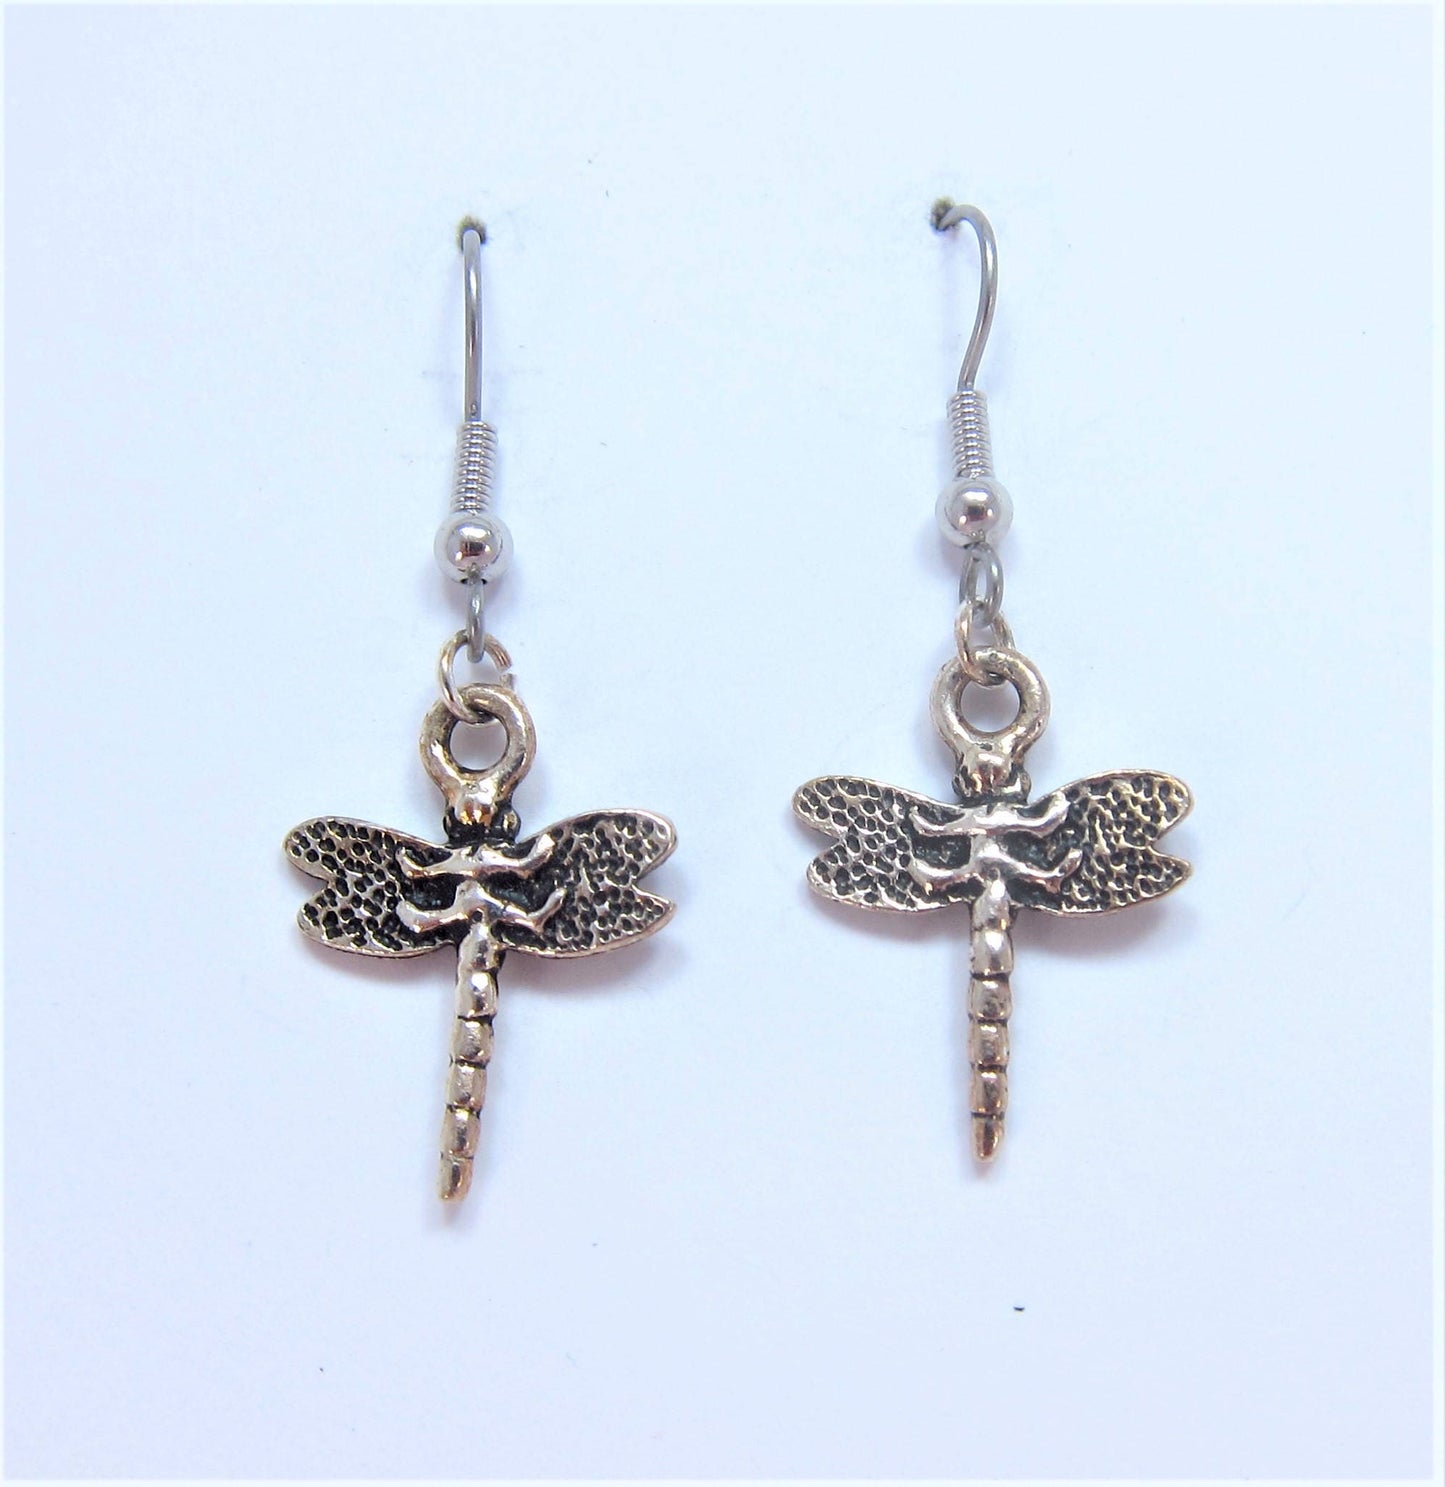 Charmed! Dragonfly earrings silver plate antique finish on hypoallergenic surgical steel hooks